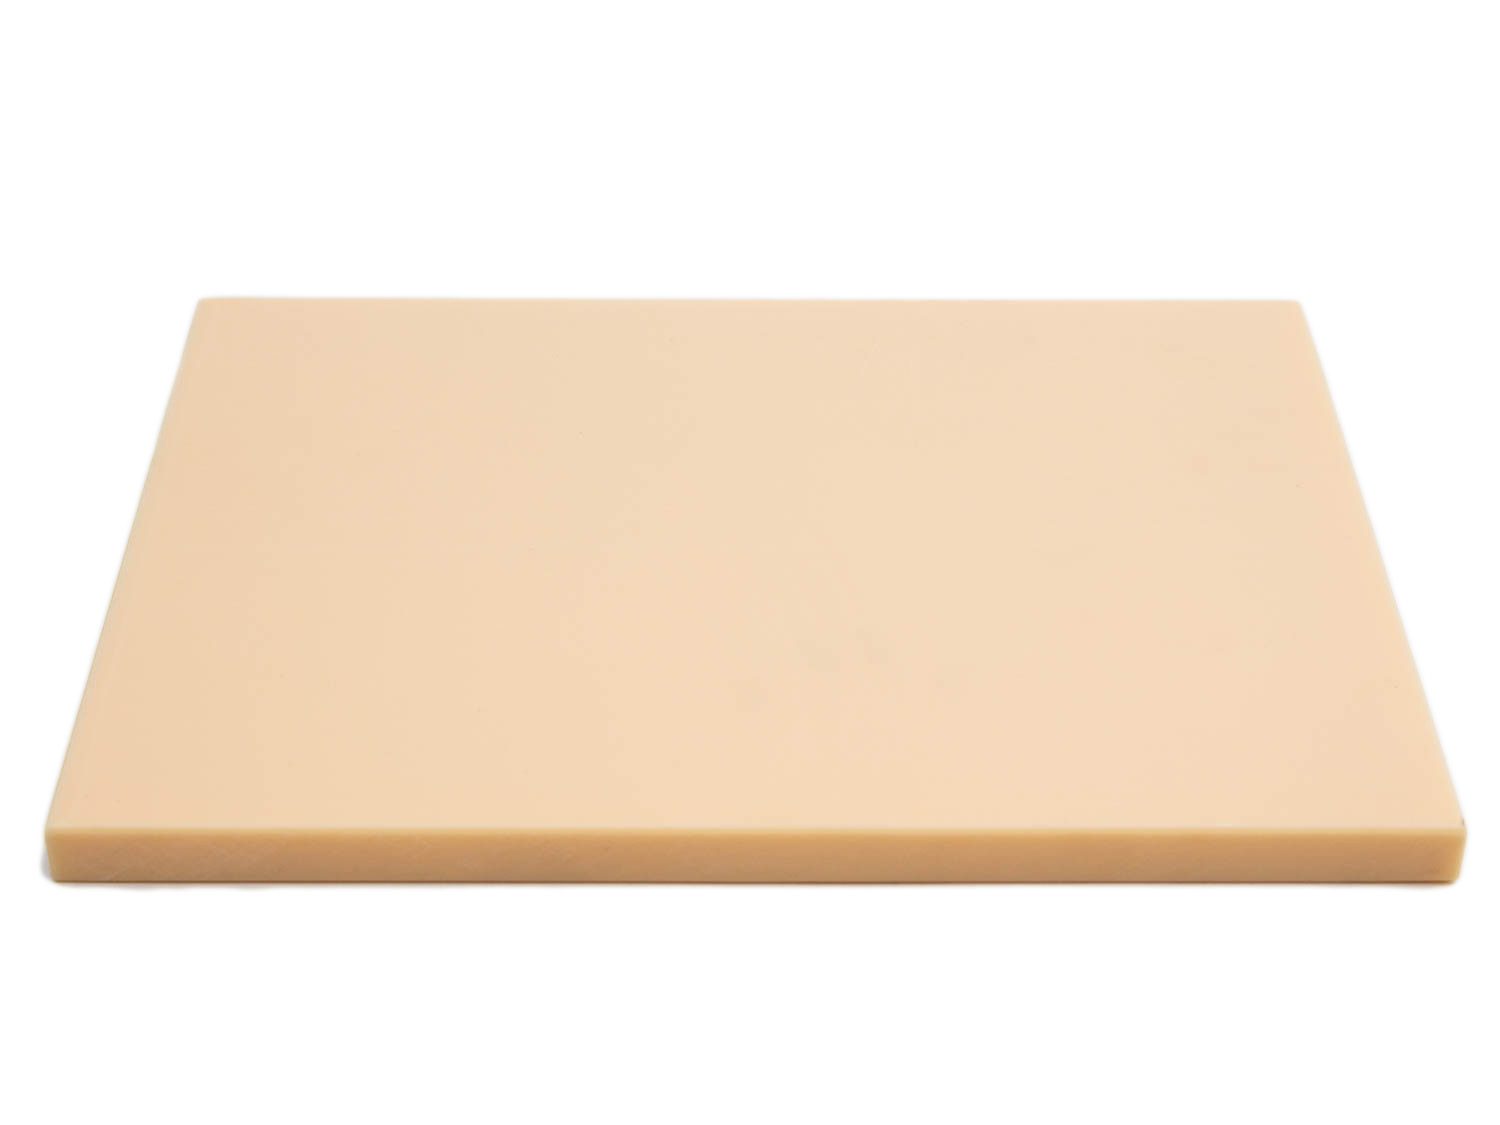 We like these Japanese high-soft cutting boards for their wood-like performance.